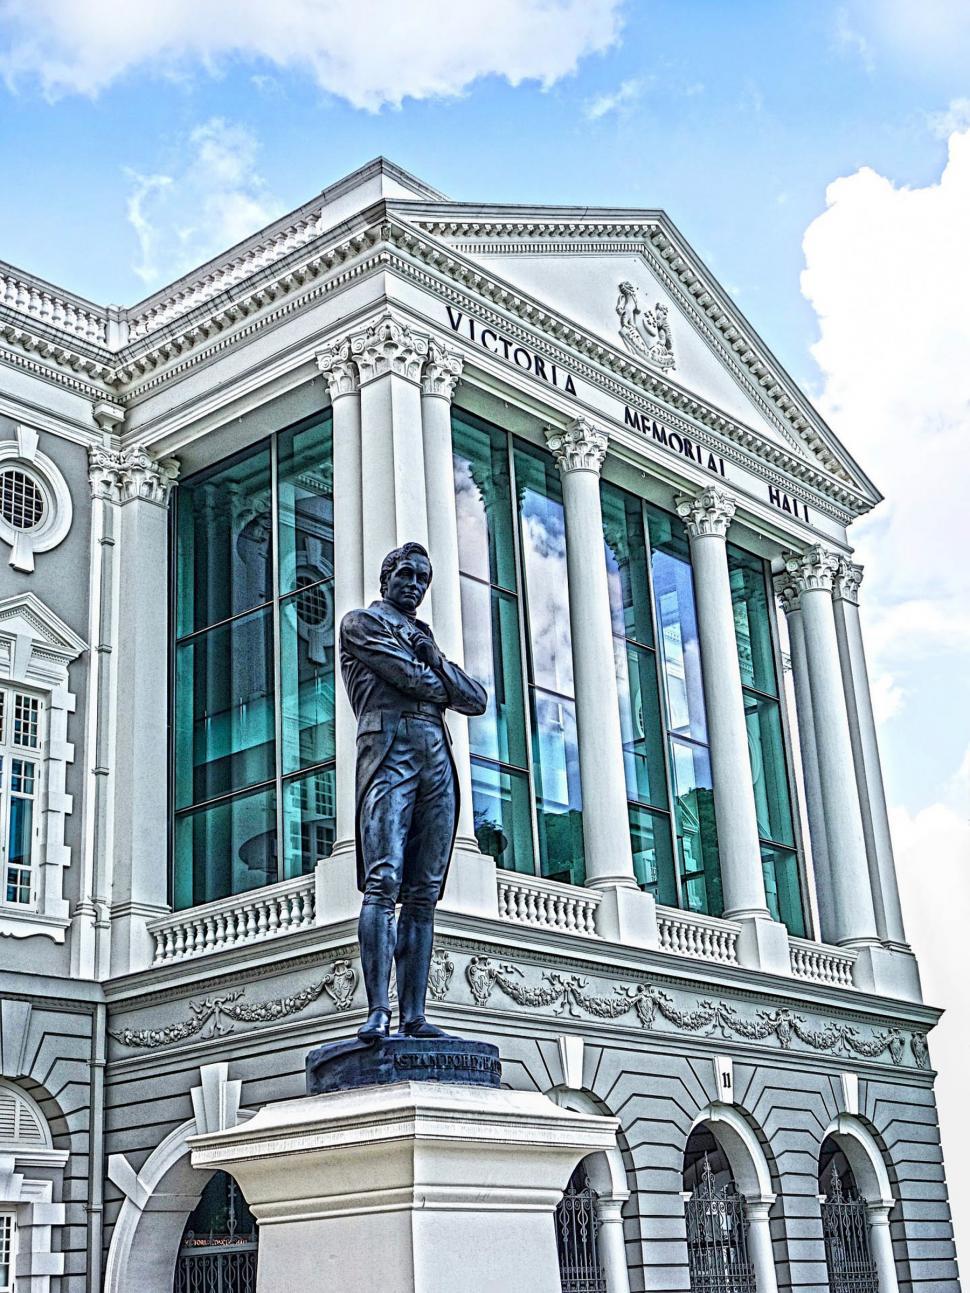 Free Image of Statue of Man in Front of Building 